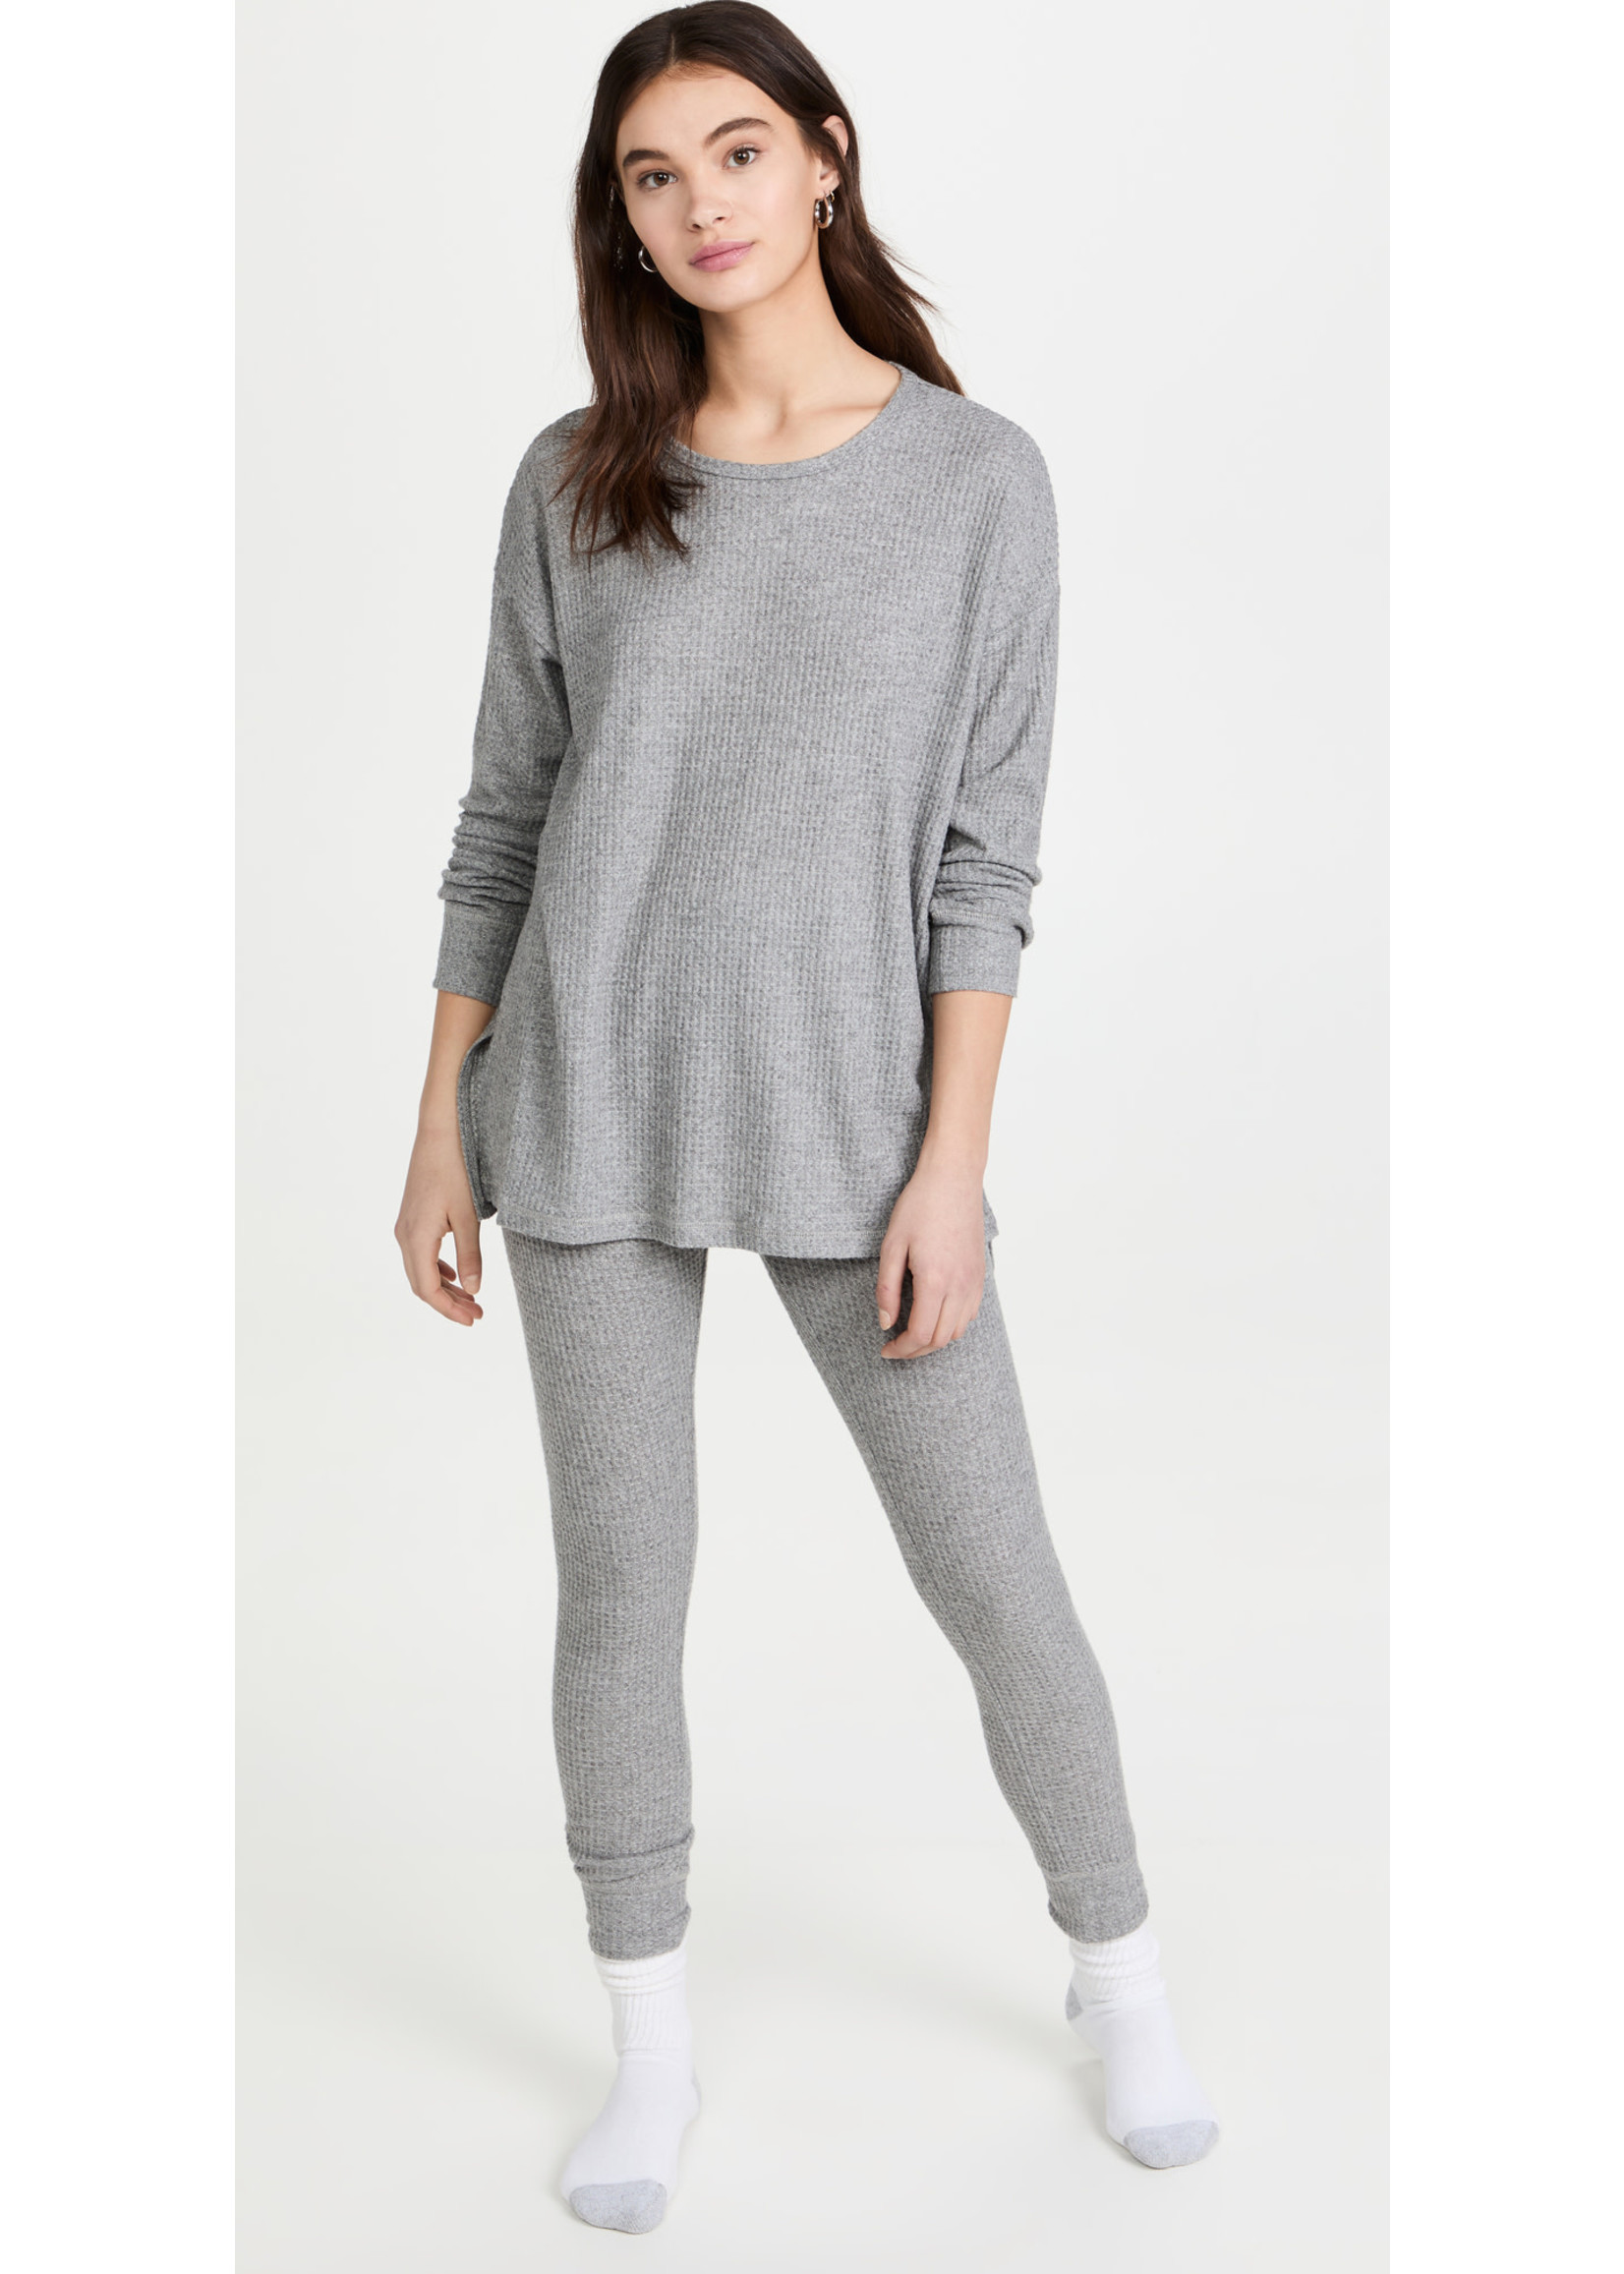 z supply Self Love Thermal Tunic